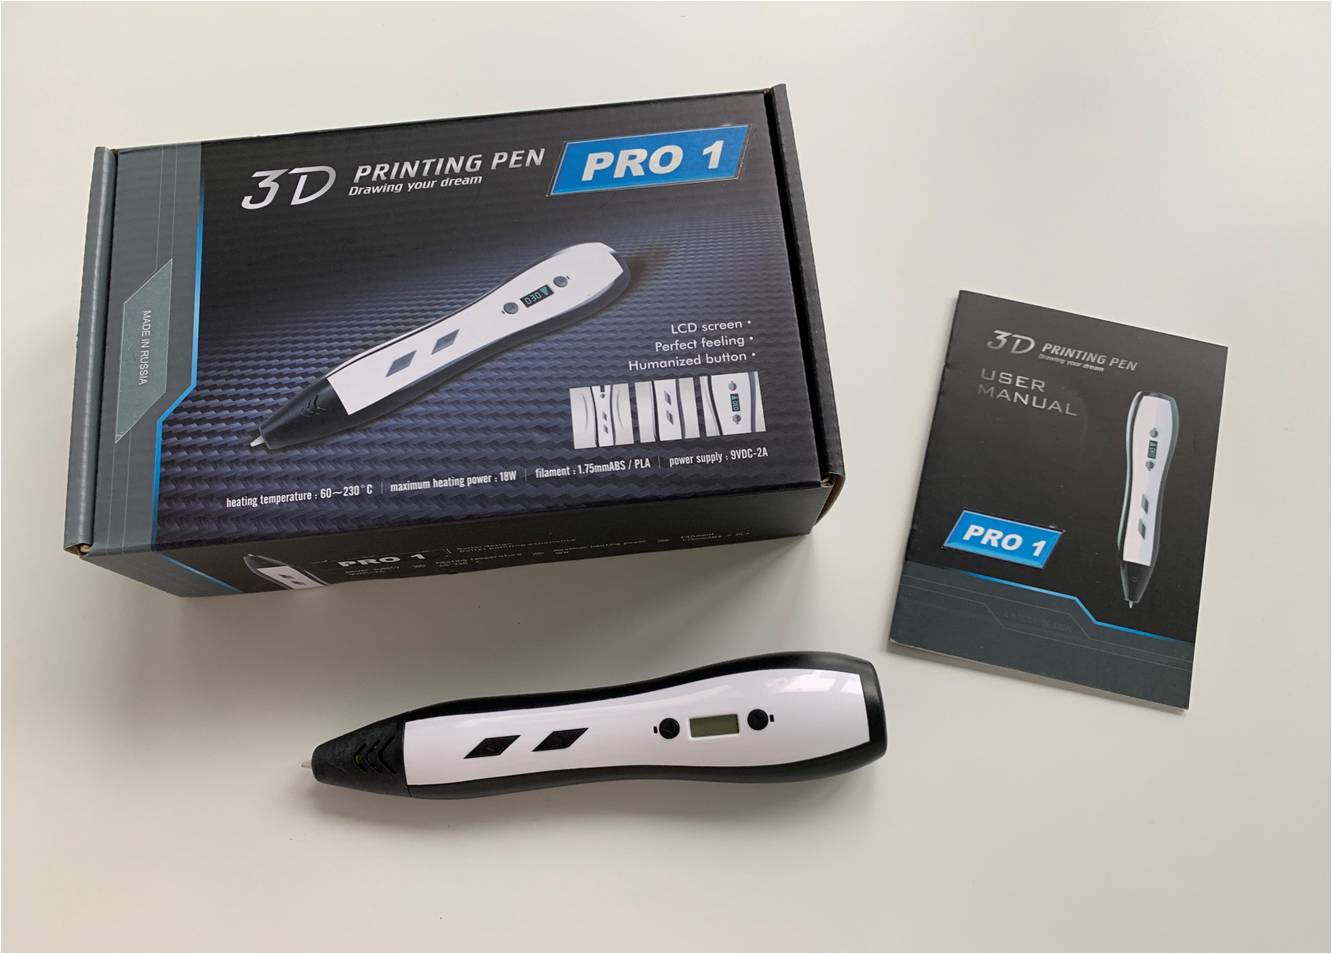 3D Printing Pen by PRO 1